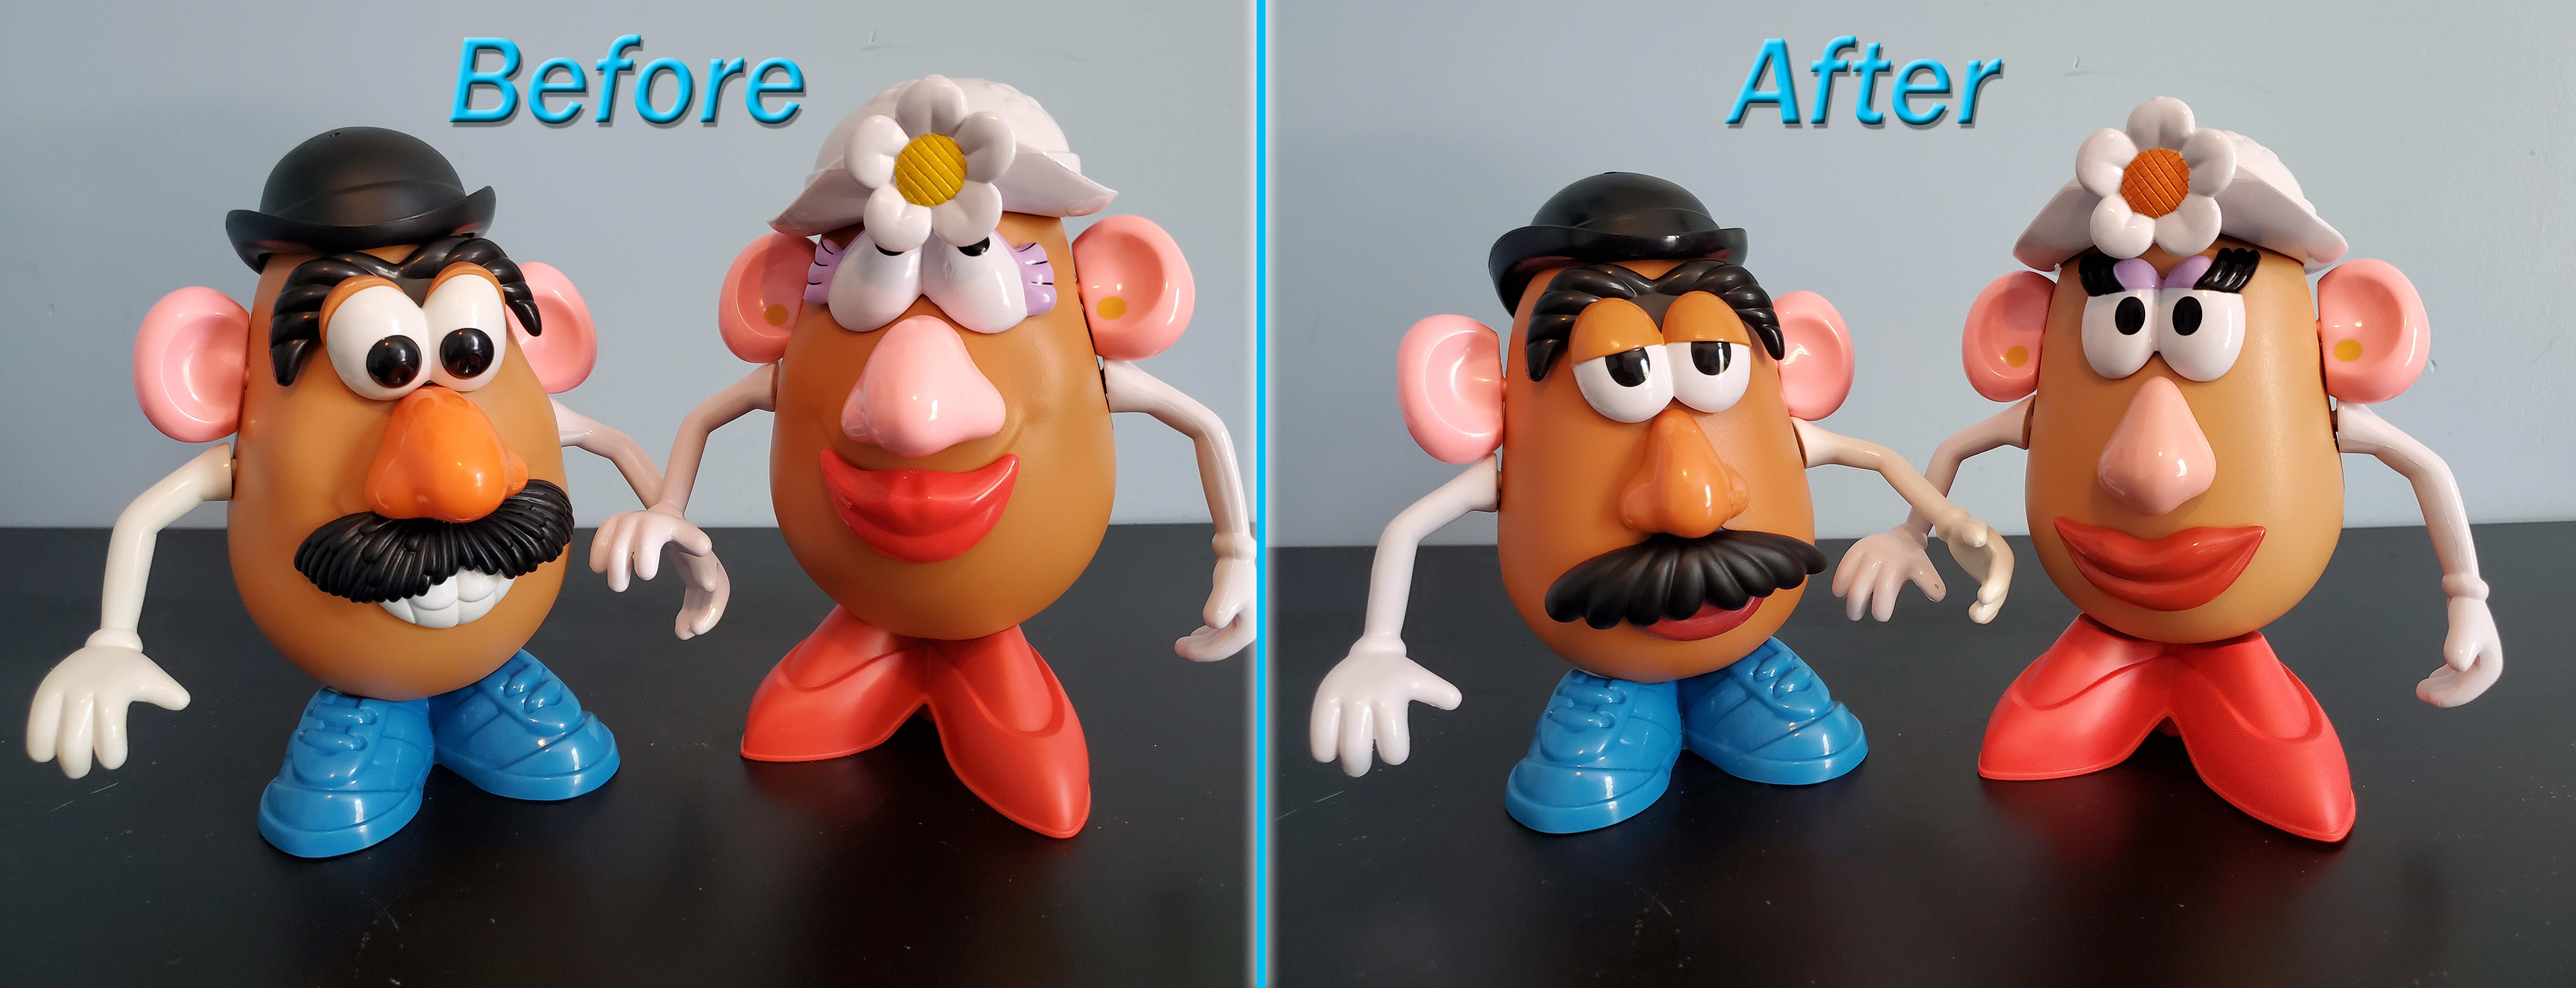 My New And Improved Mr And Mrs Potato Head By Porygon2z On Deviantart